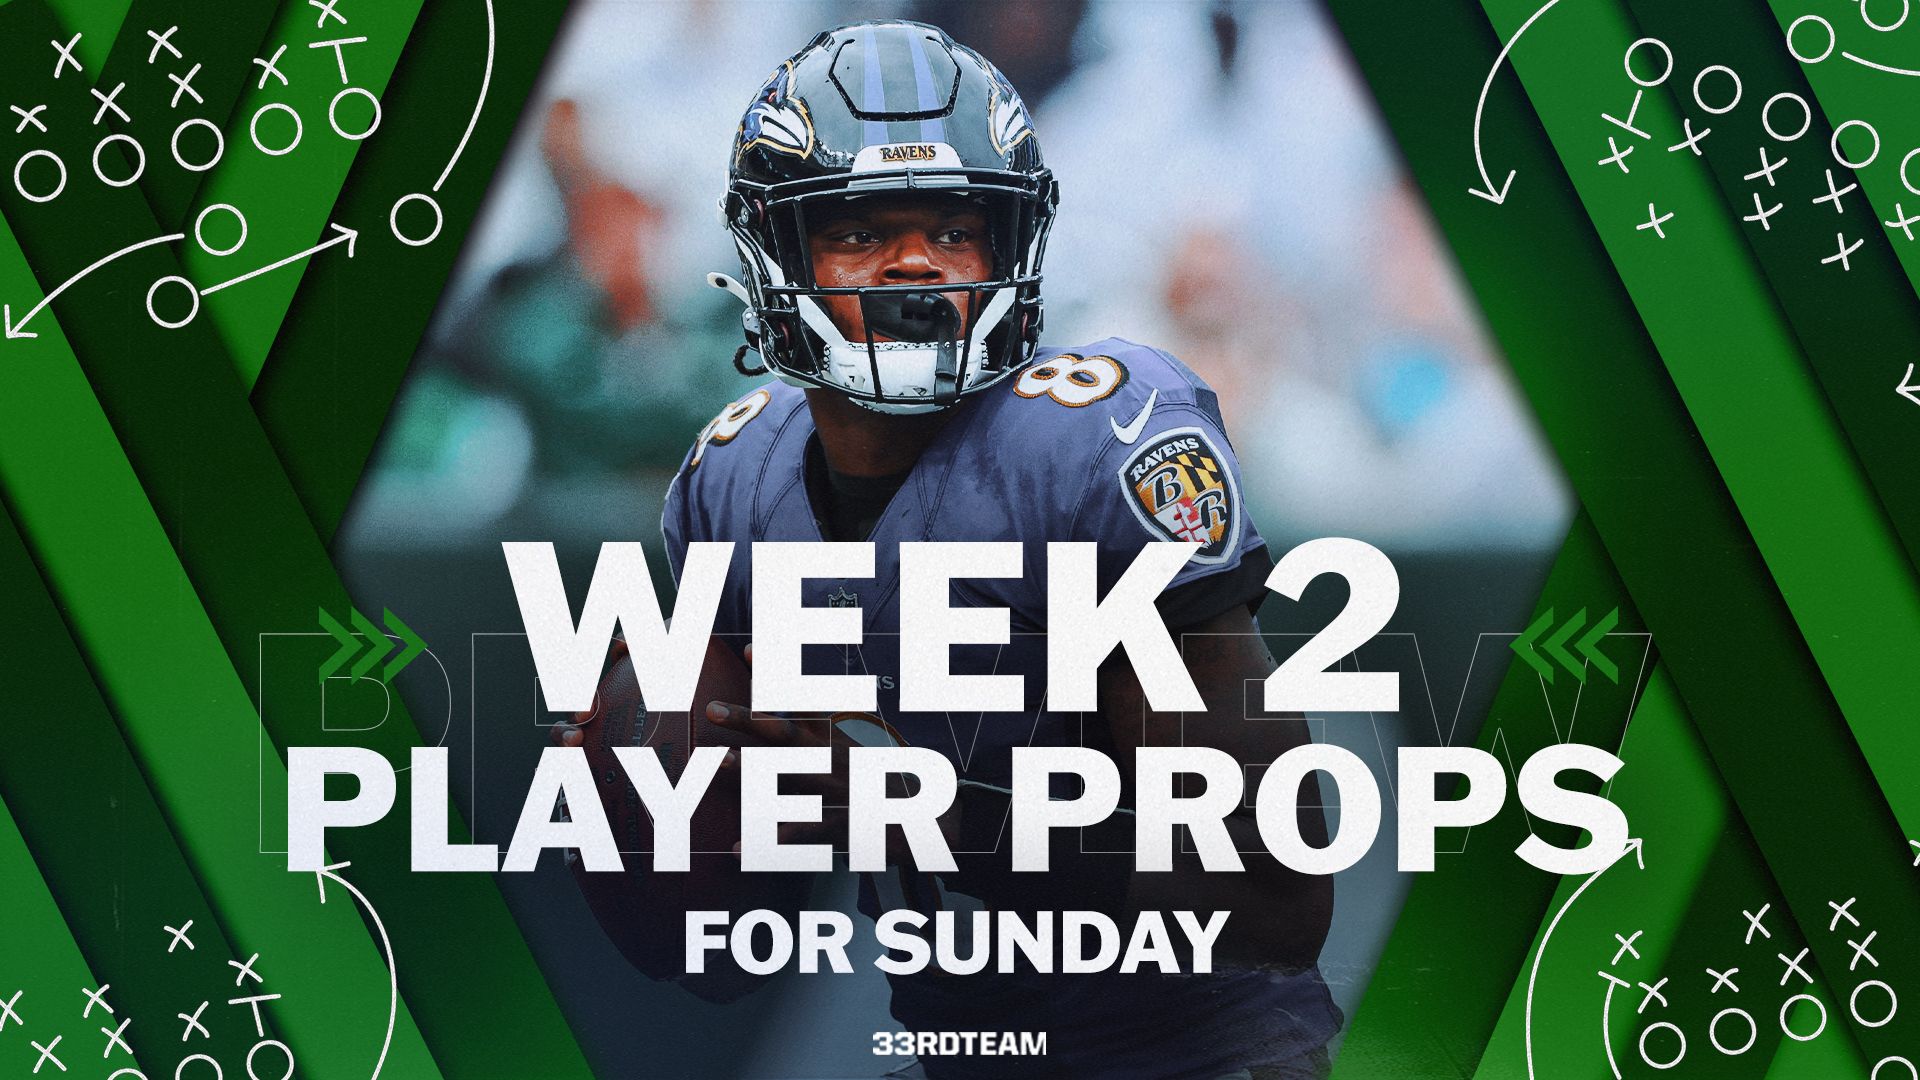 Week 2 Player Props for Sunday